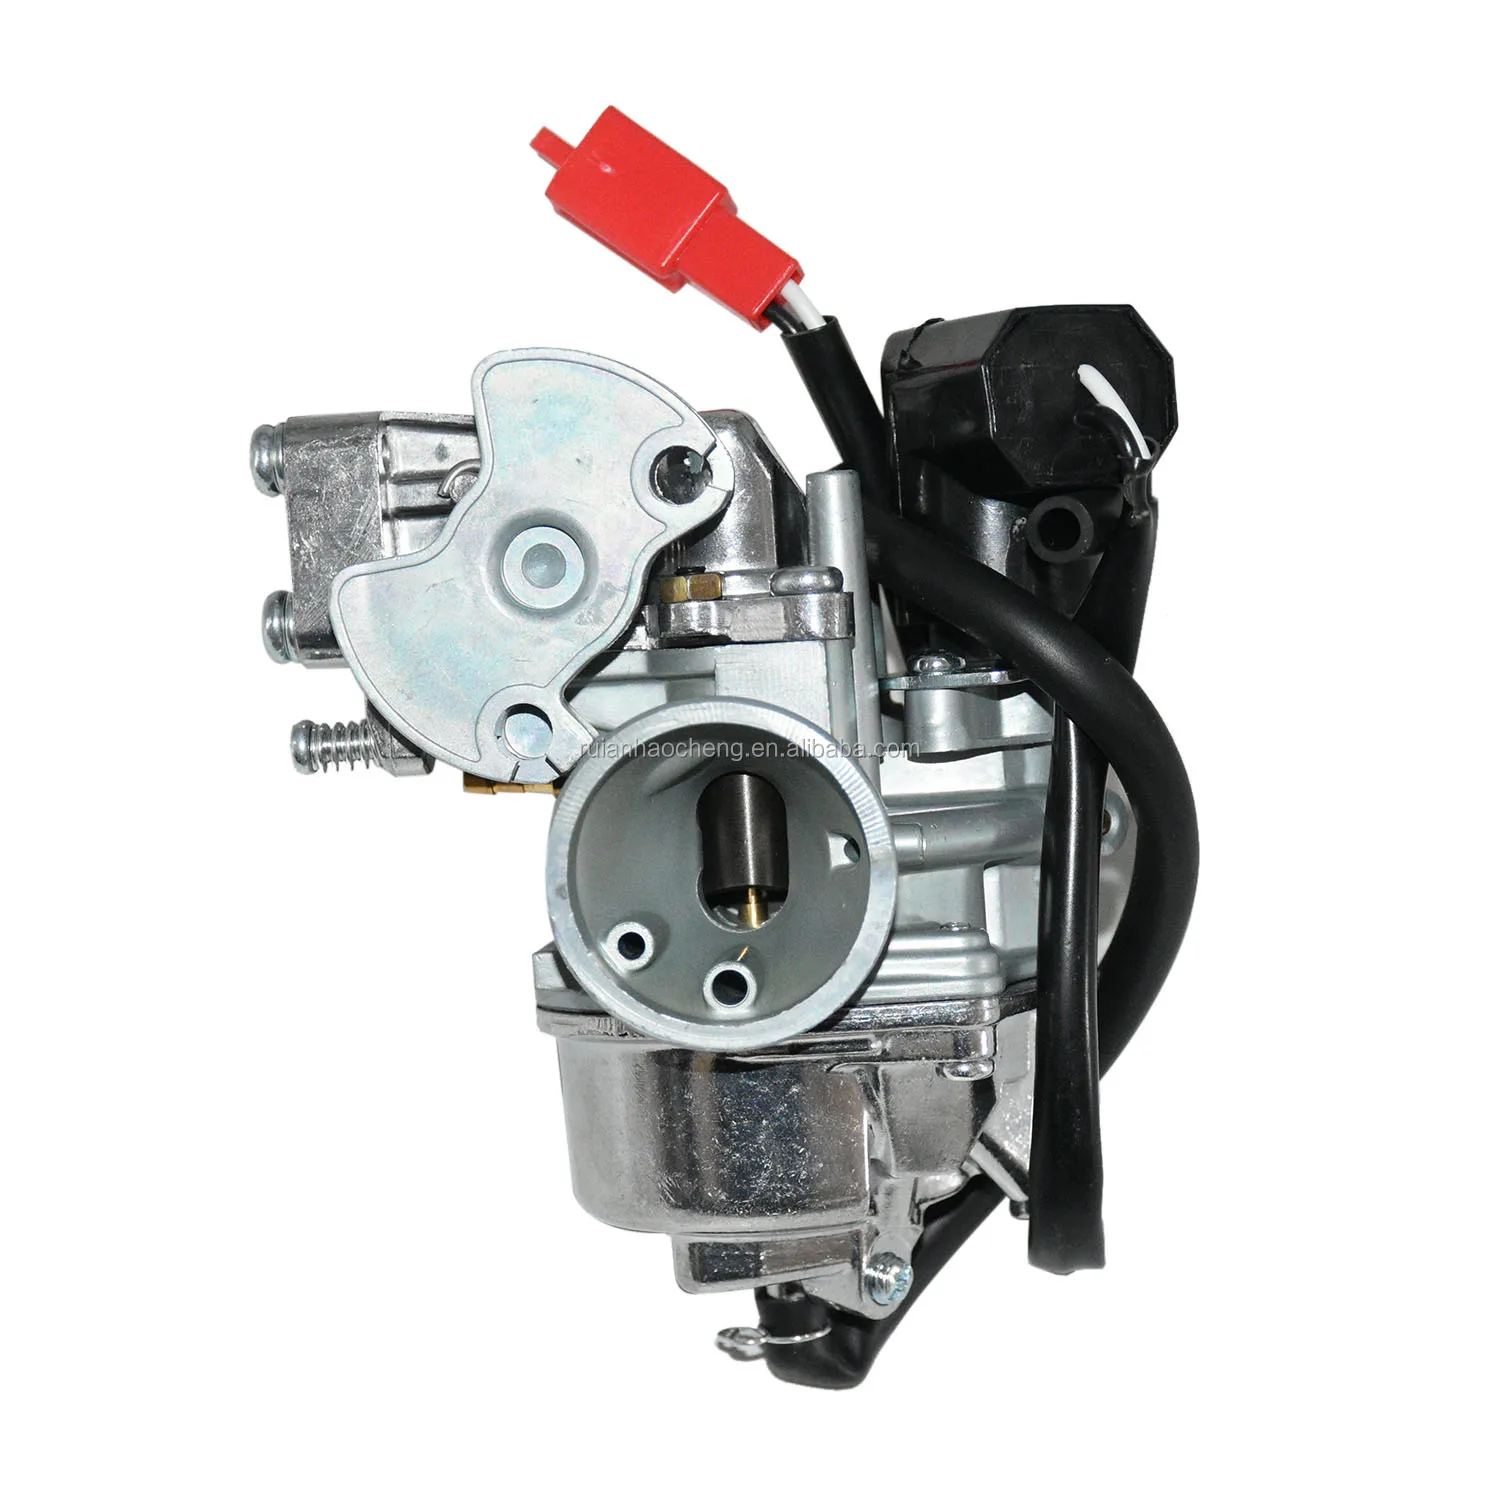 Carburetor For Yamaha Zuma YW50 Scooter Moped 2011-2002 2003 2004 2005 2006 Carb 